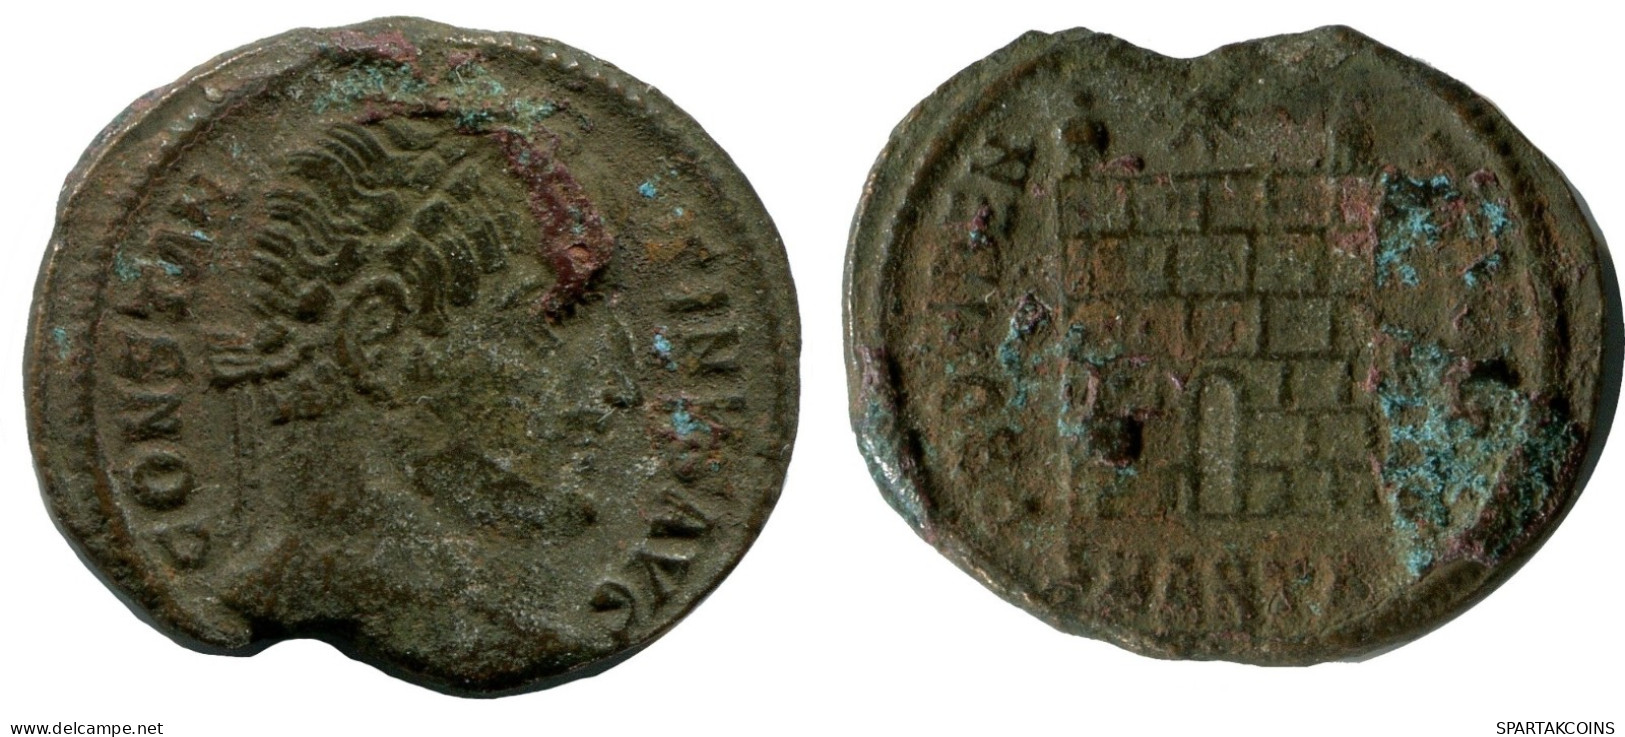 CONSTANTINE I MINTED IN ANTIOCH FOUND IN IHNASYAH HOARD EGYPT #ANC10613.14.D.A - The Christian Empire (307 AD Tot 363 AD)